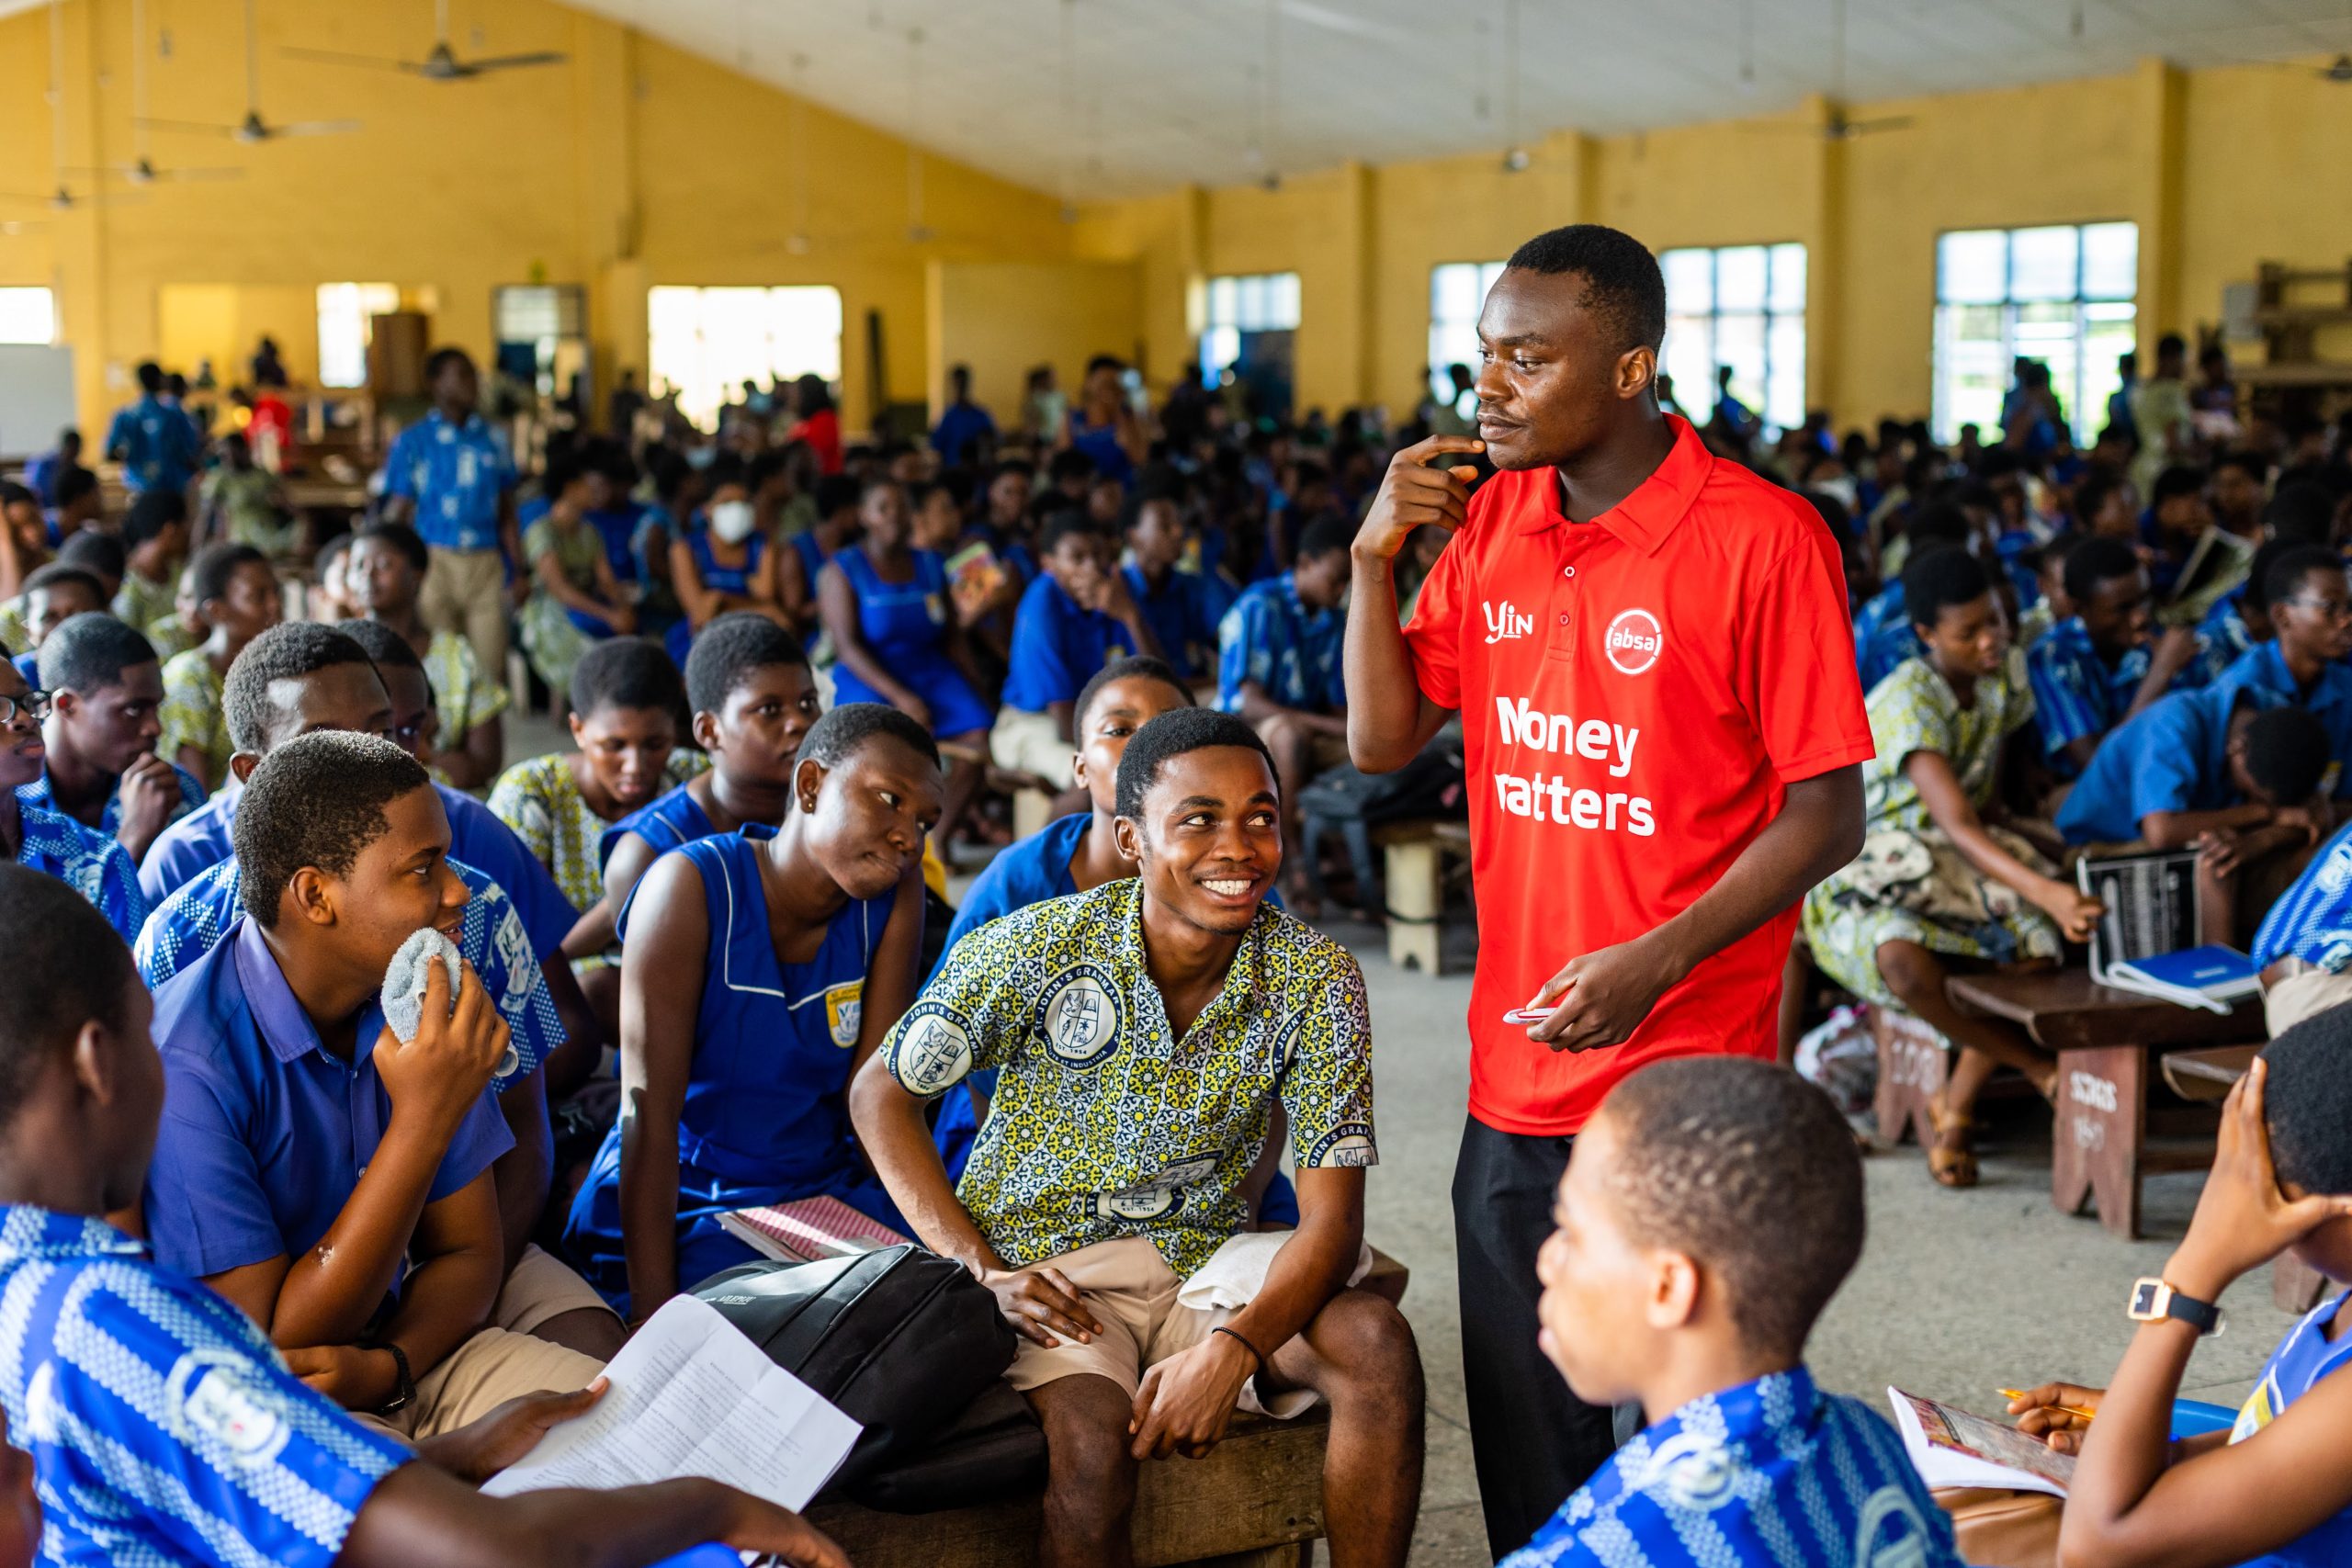 Absa Bank Ghana’s ‘Money Matters’ initiative reaches over 50,000 students nationwide